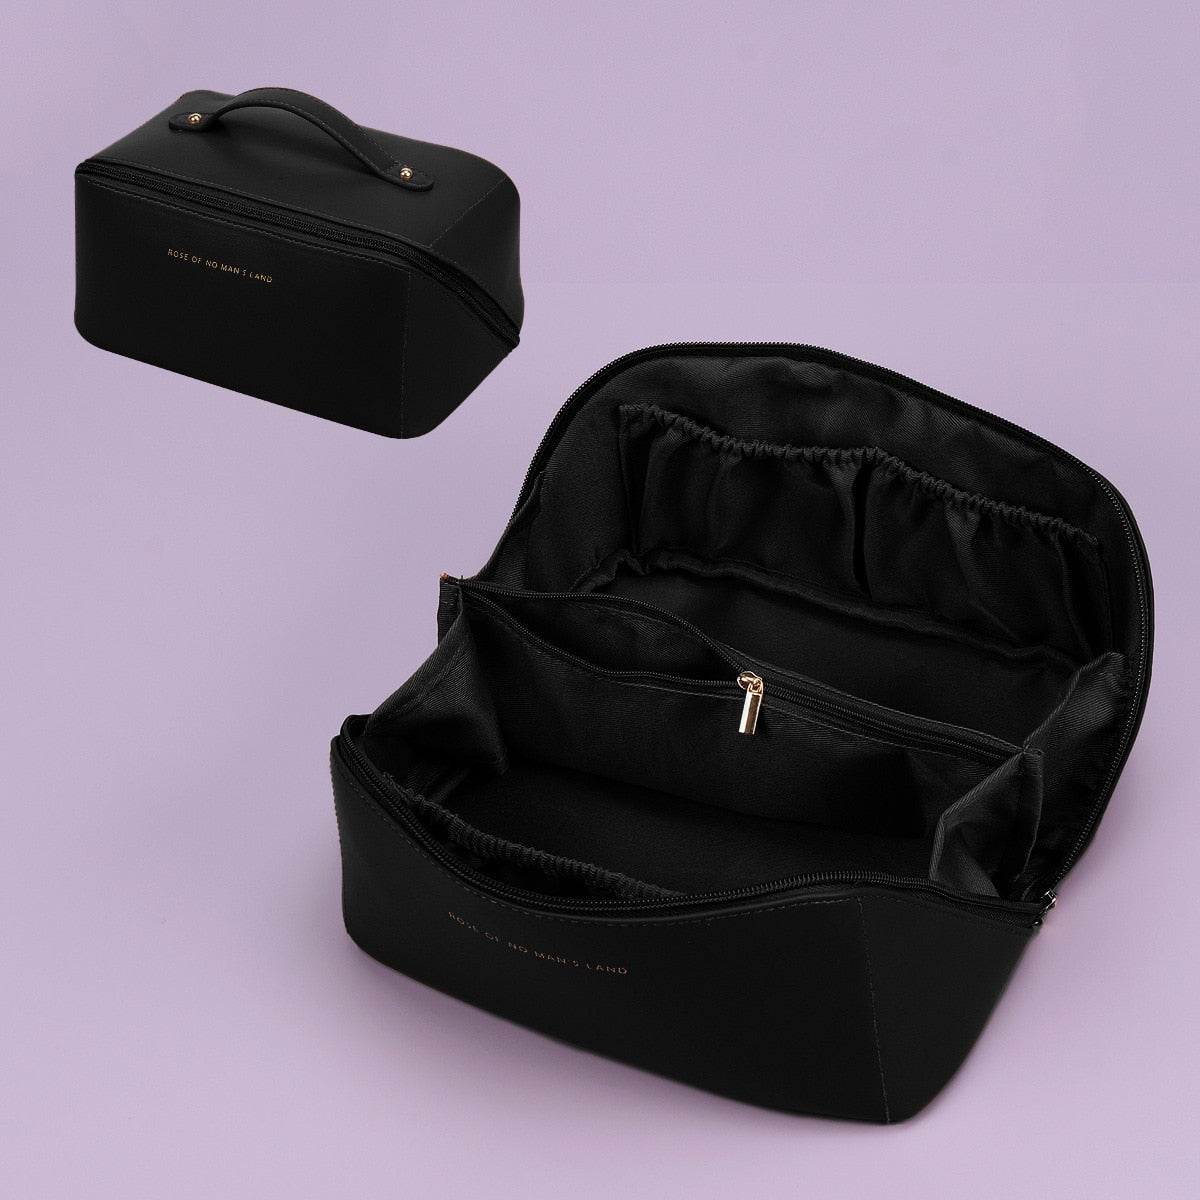 A new 2022 travel toiletry bag with large capacity and portability